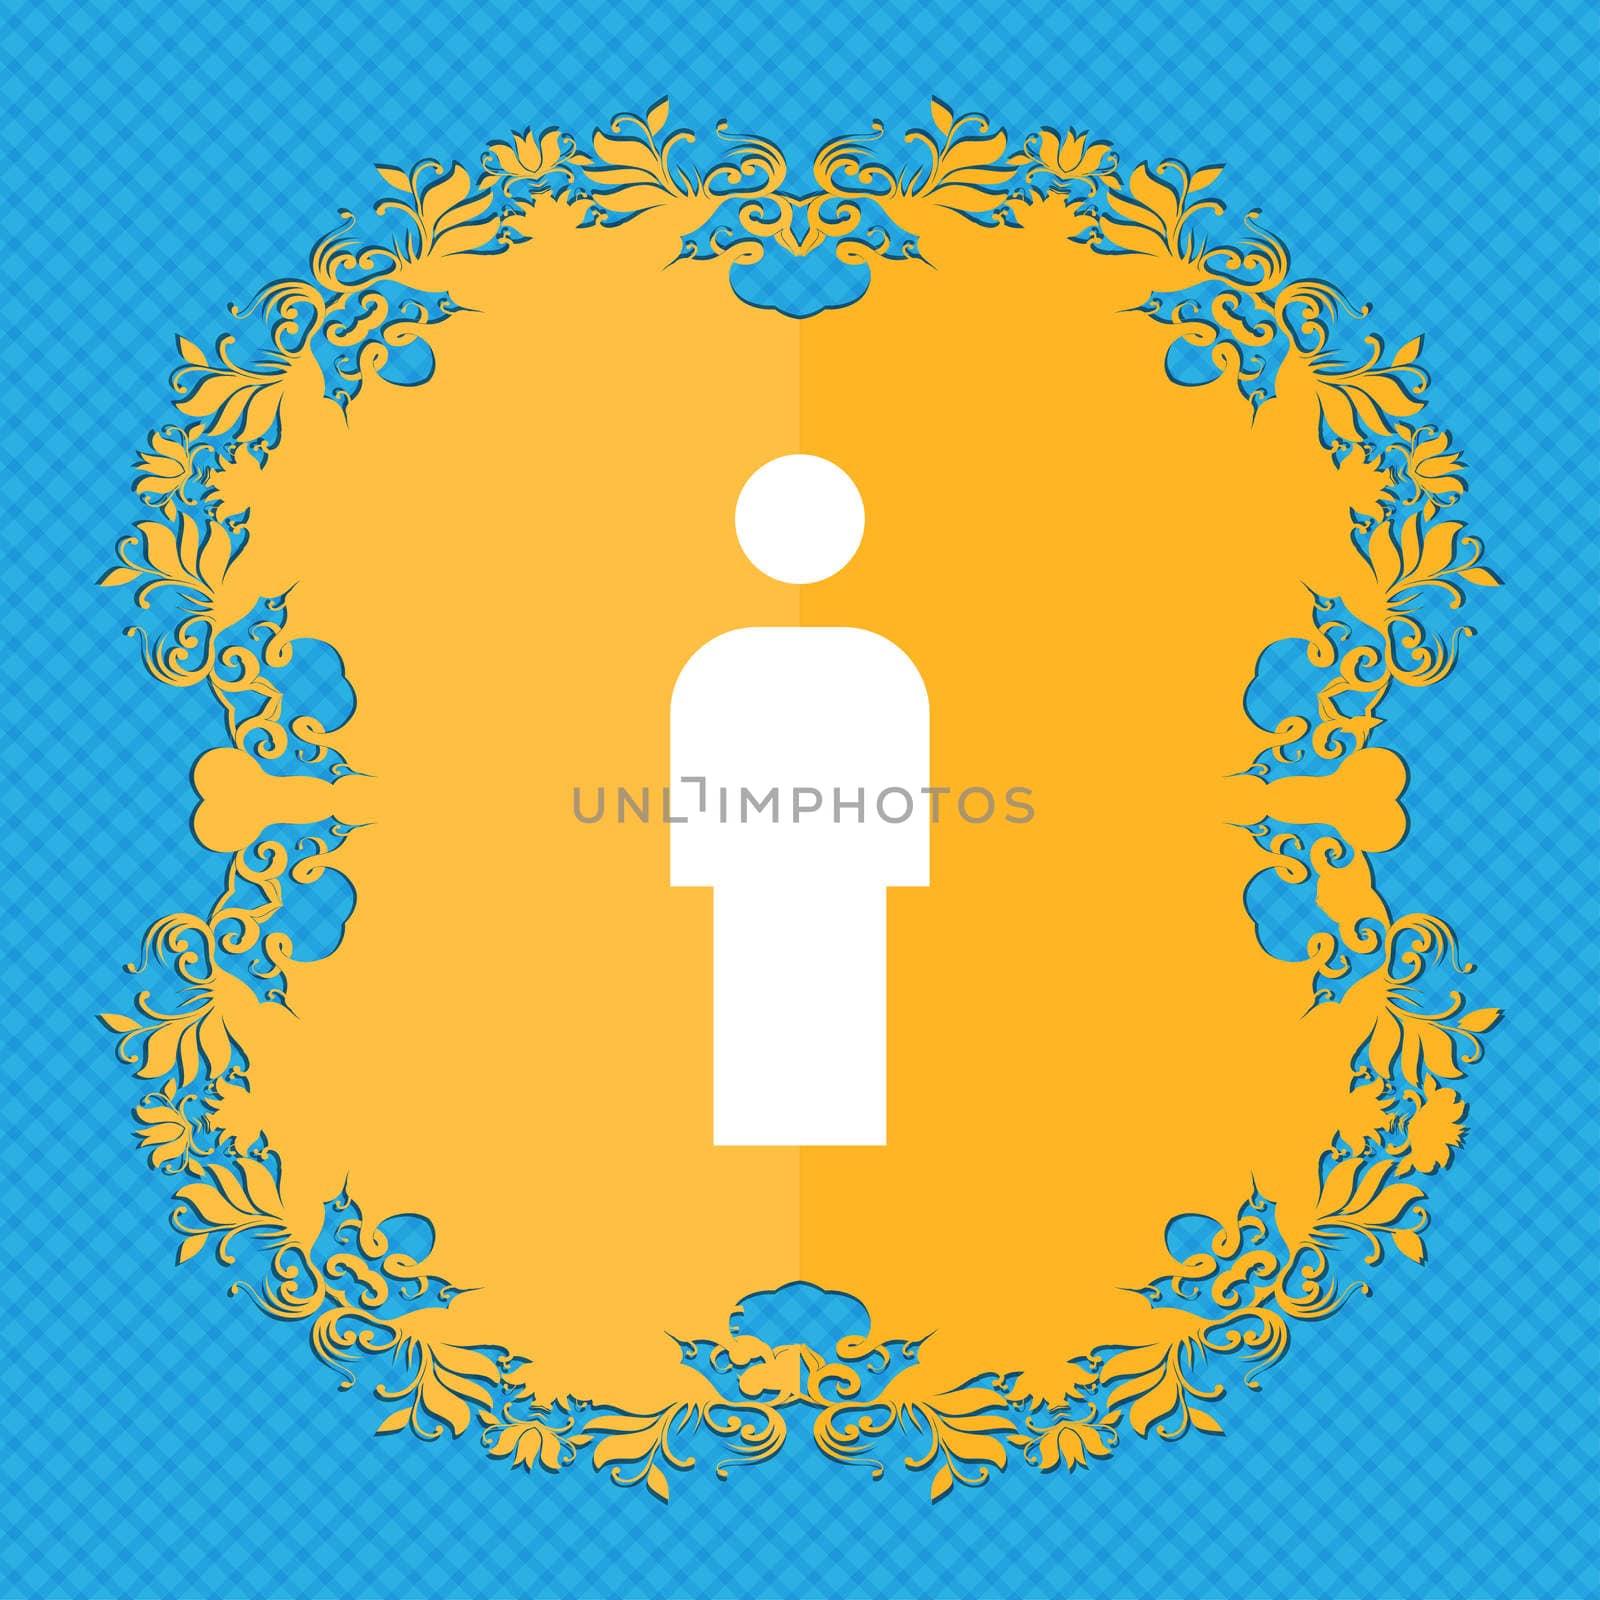 Human, Man Person, Male toilet . Floral flat design on a blue abstract background with place for your text. illustration